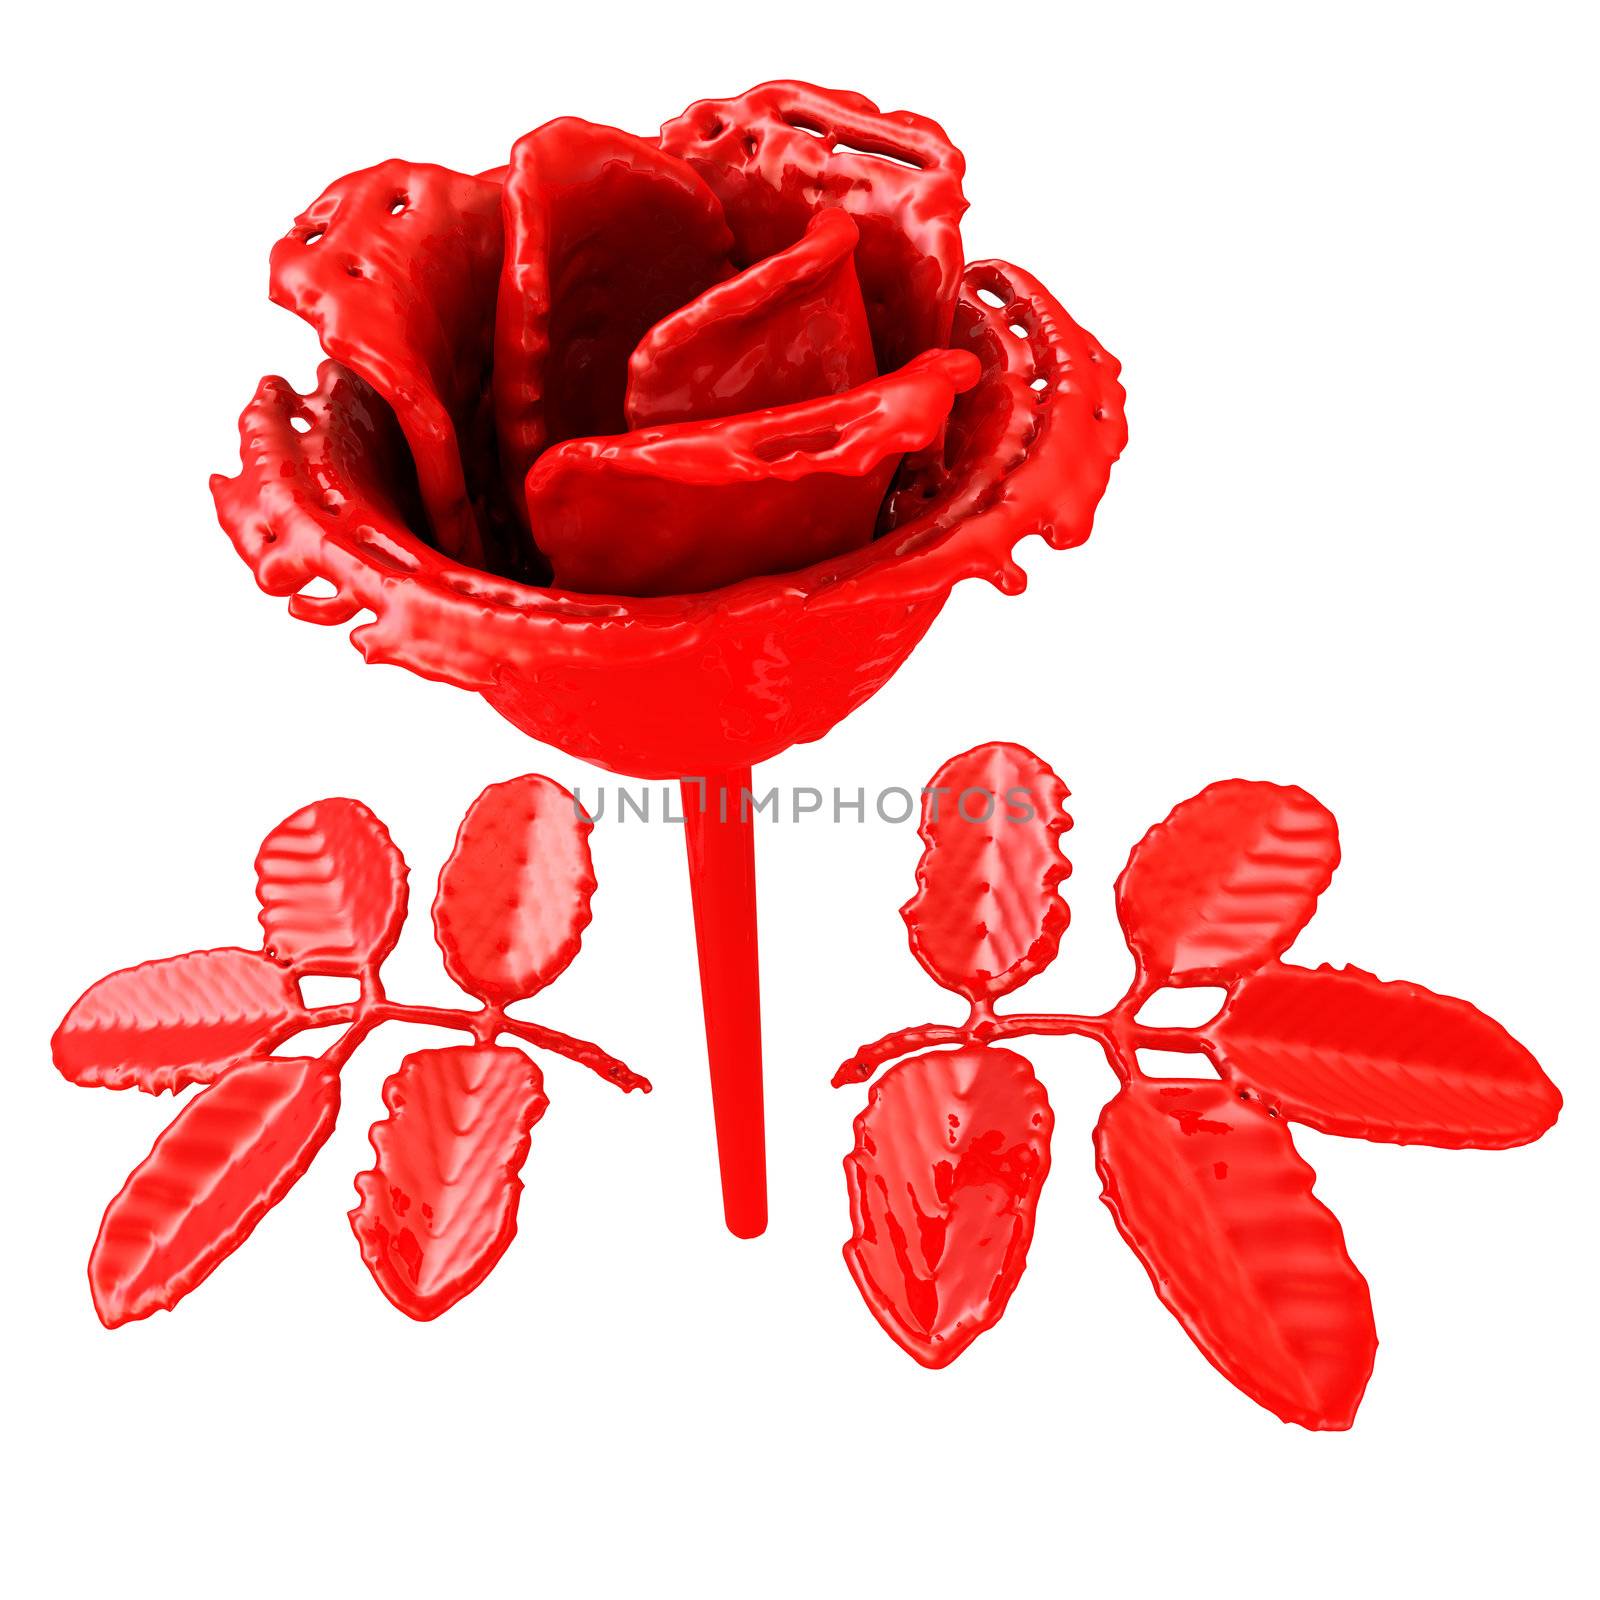 Red rose of the paint. Isolated on white background by cherezoff